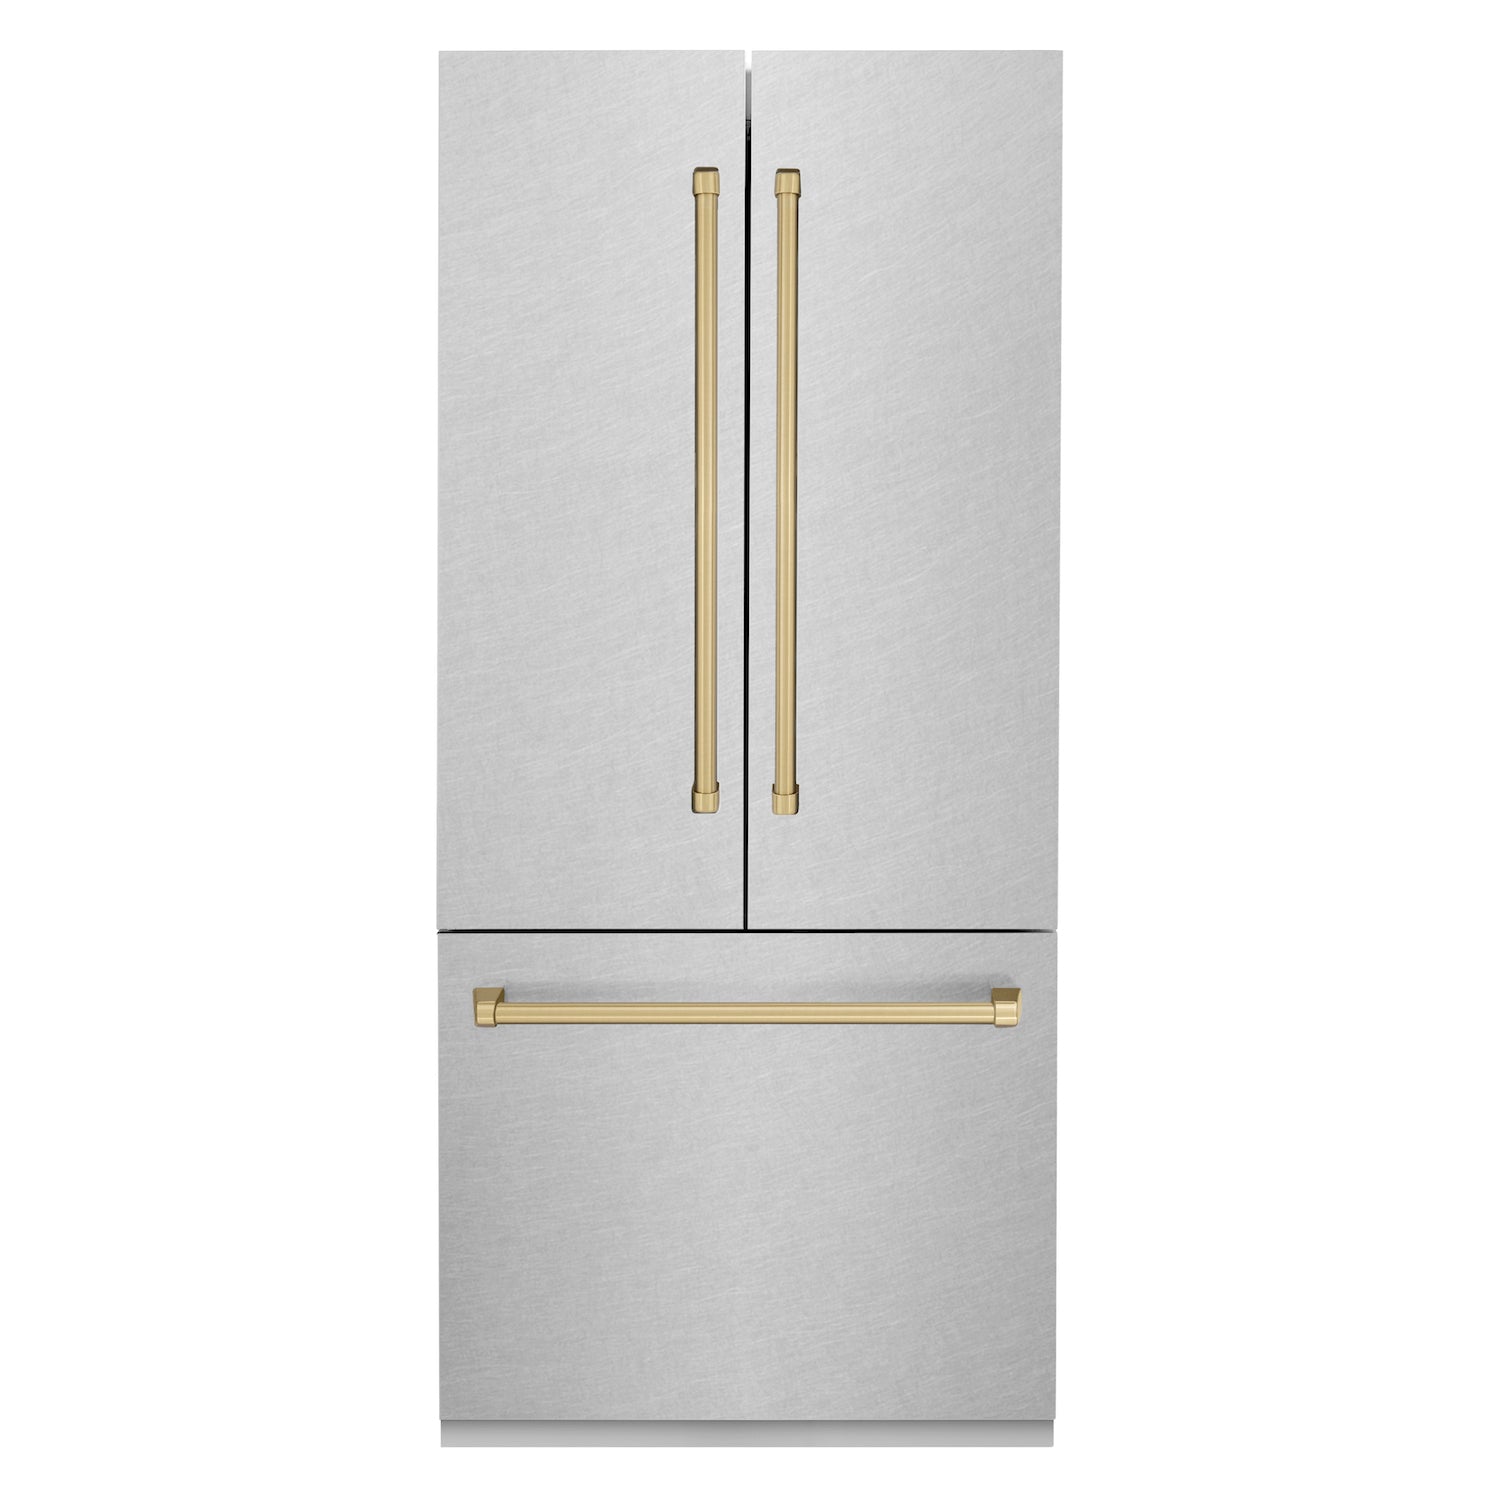 ZLINE Autograph Edition 36 in. 19.6 cu. ft. Built-in 2-Door Bottom Freezer Refrigerator with Internal Water and Ice Dispenser in Fingerprint Resistant Stainless Steel with Champagne Bronze Accents (RBIVZ-SN-36-CB) front, closed.